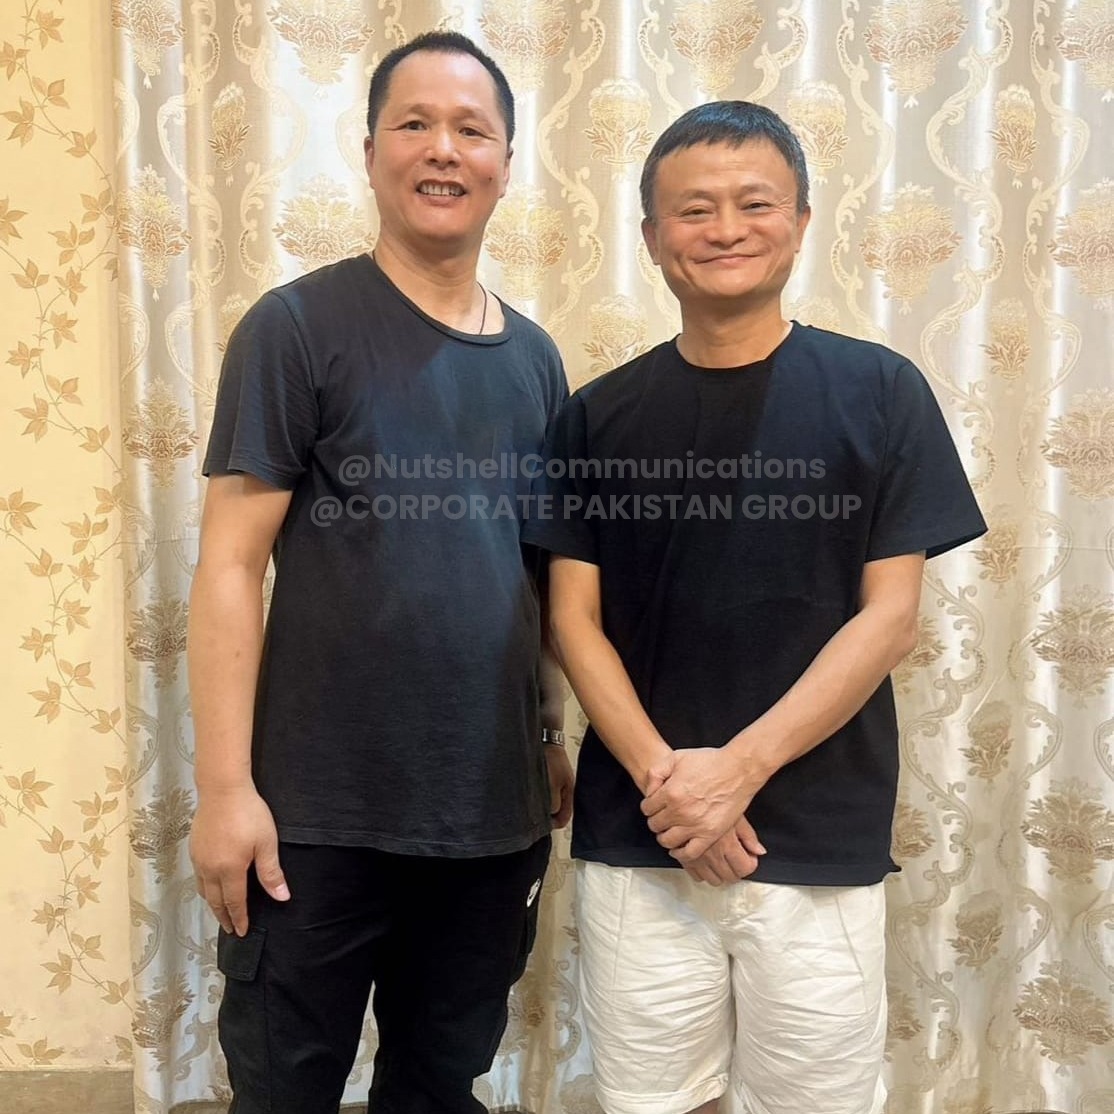 Jack Ma with a friend during his visit to Pakistan